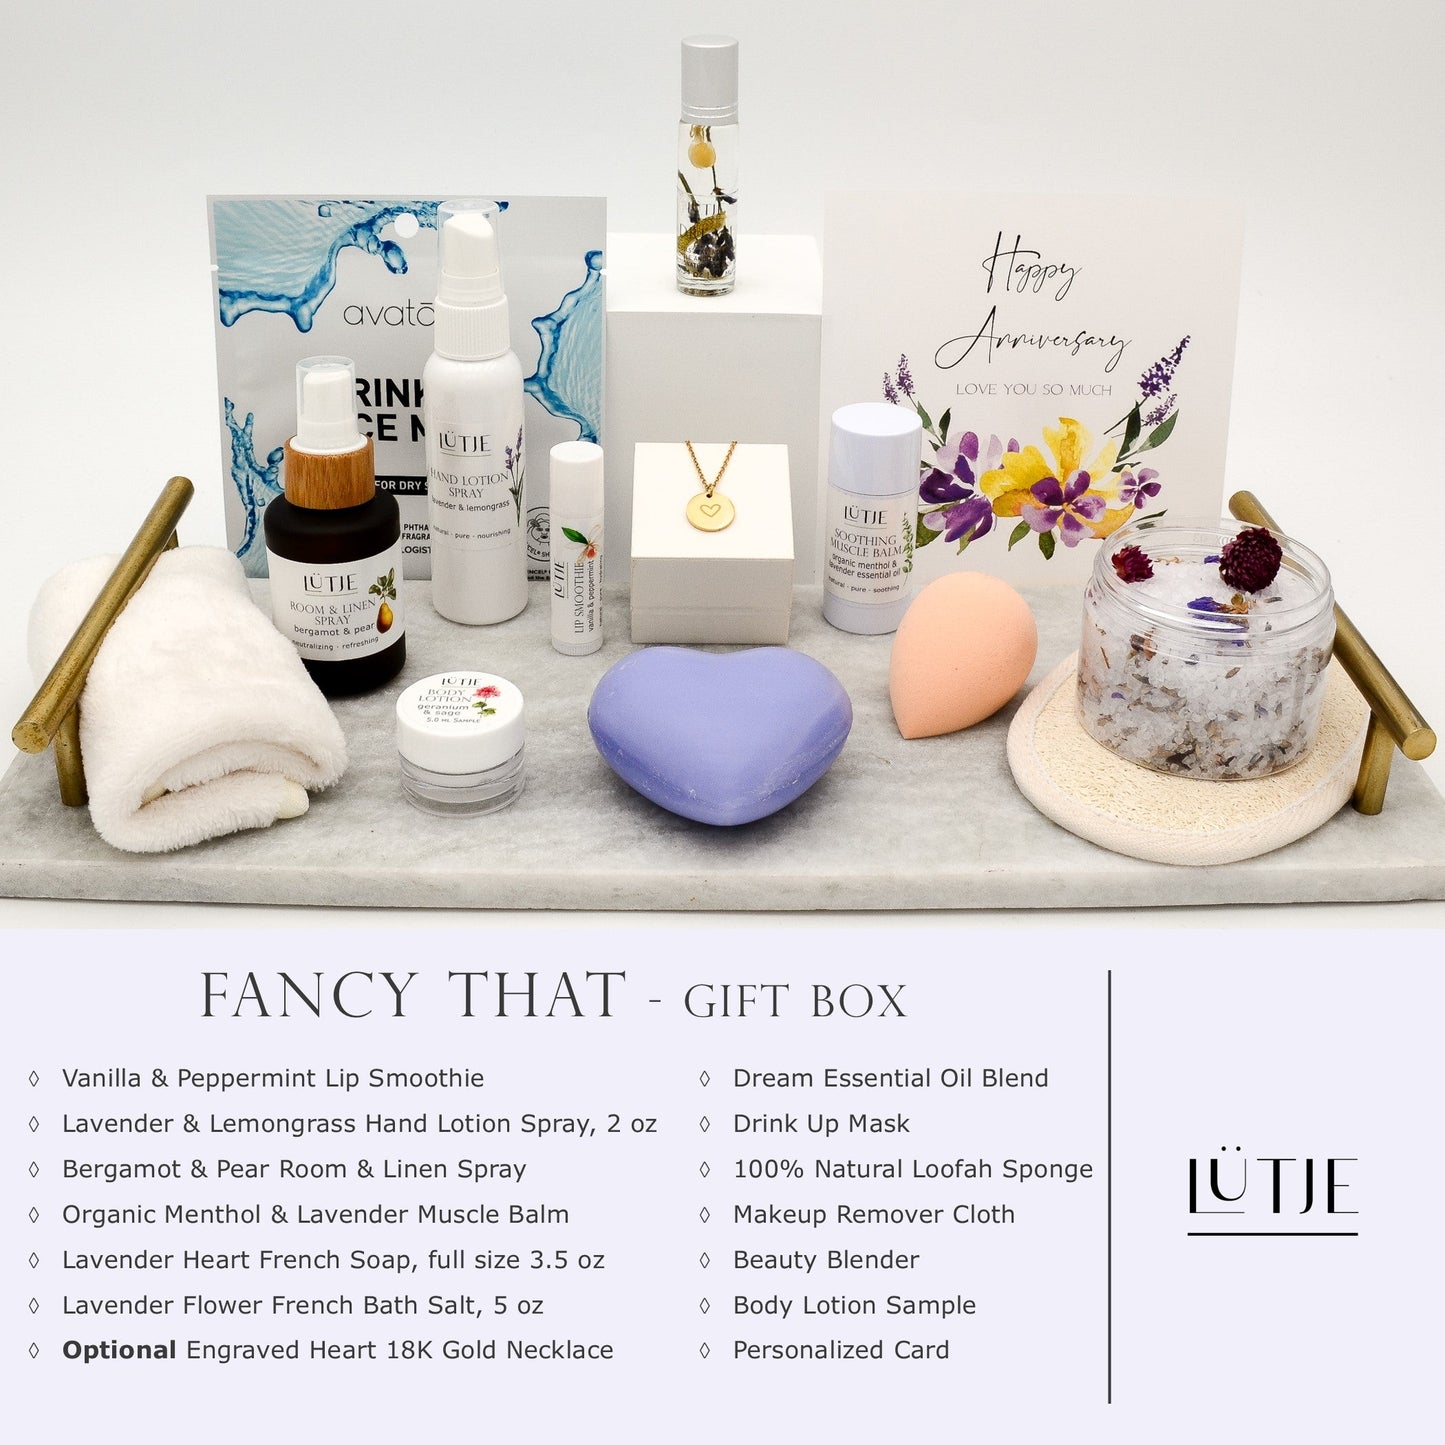 Fancy That Gift Box for women, BFF, wife, daughter, sister, mom, or grandma, includes Lavender & Lemongrass hand lotion spray, essential oil, lip balm, soothing muscle balm, Bergamot & Pear room & linen spray, French soap, French bath salts, hydrating face mask, other bath, spa and self-care items, and optional 18K gold-plated necklace with engraved heart.